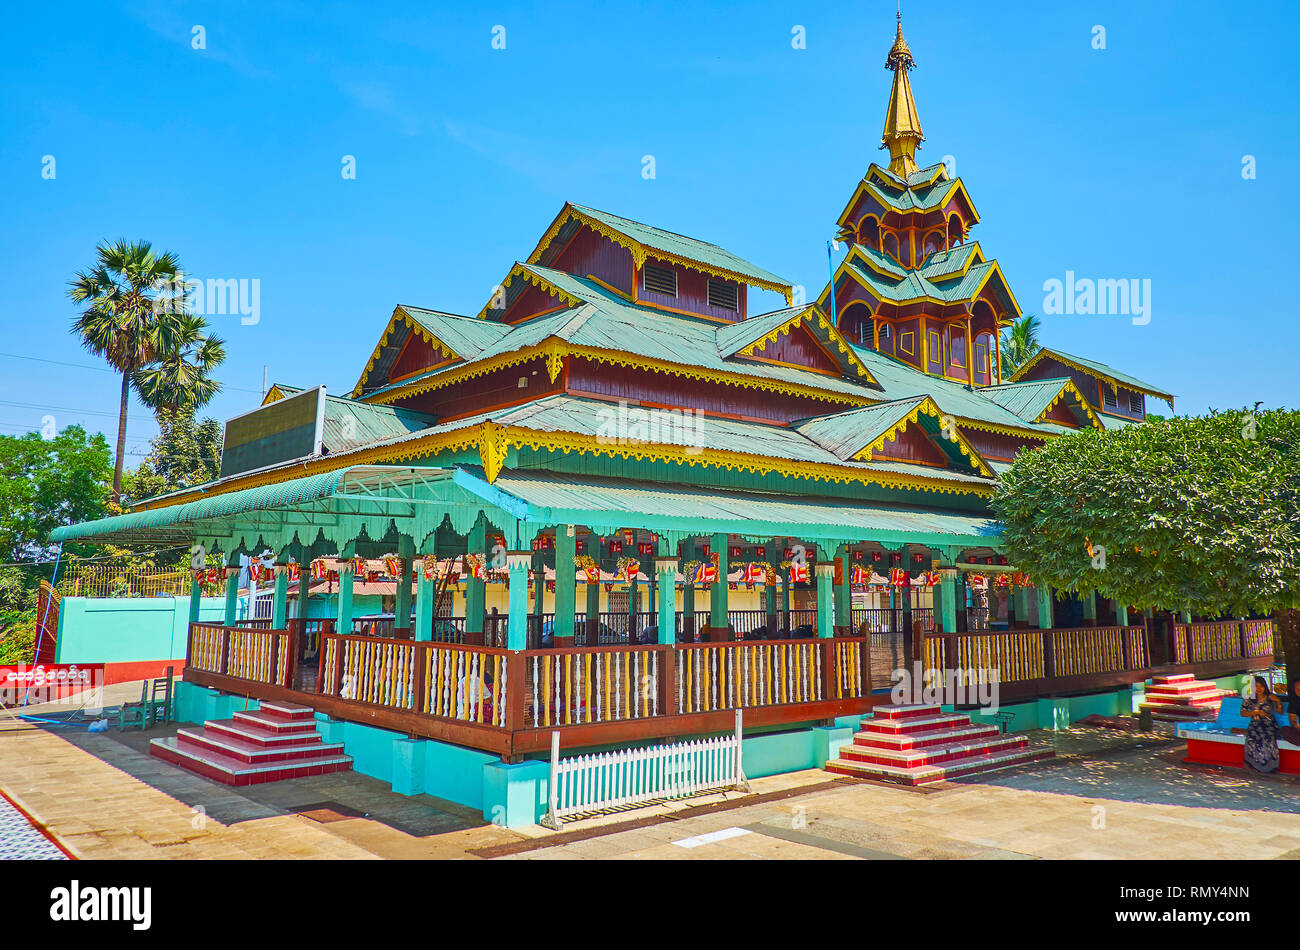 BAGO, MYANMAR - FEBRUARY 15, 2018: The colorful wooden pilgrims pavilion at the North gate of Shwemawdaw Pagoda is decorated with carved patterns and  Stock Photo